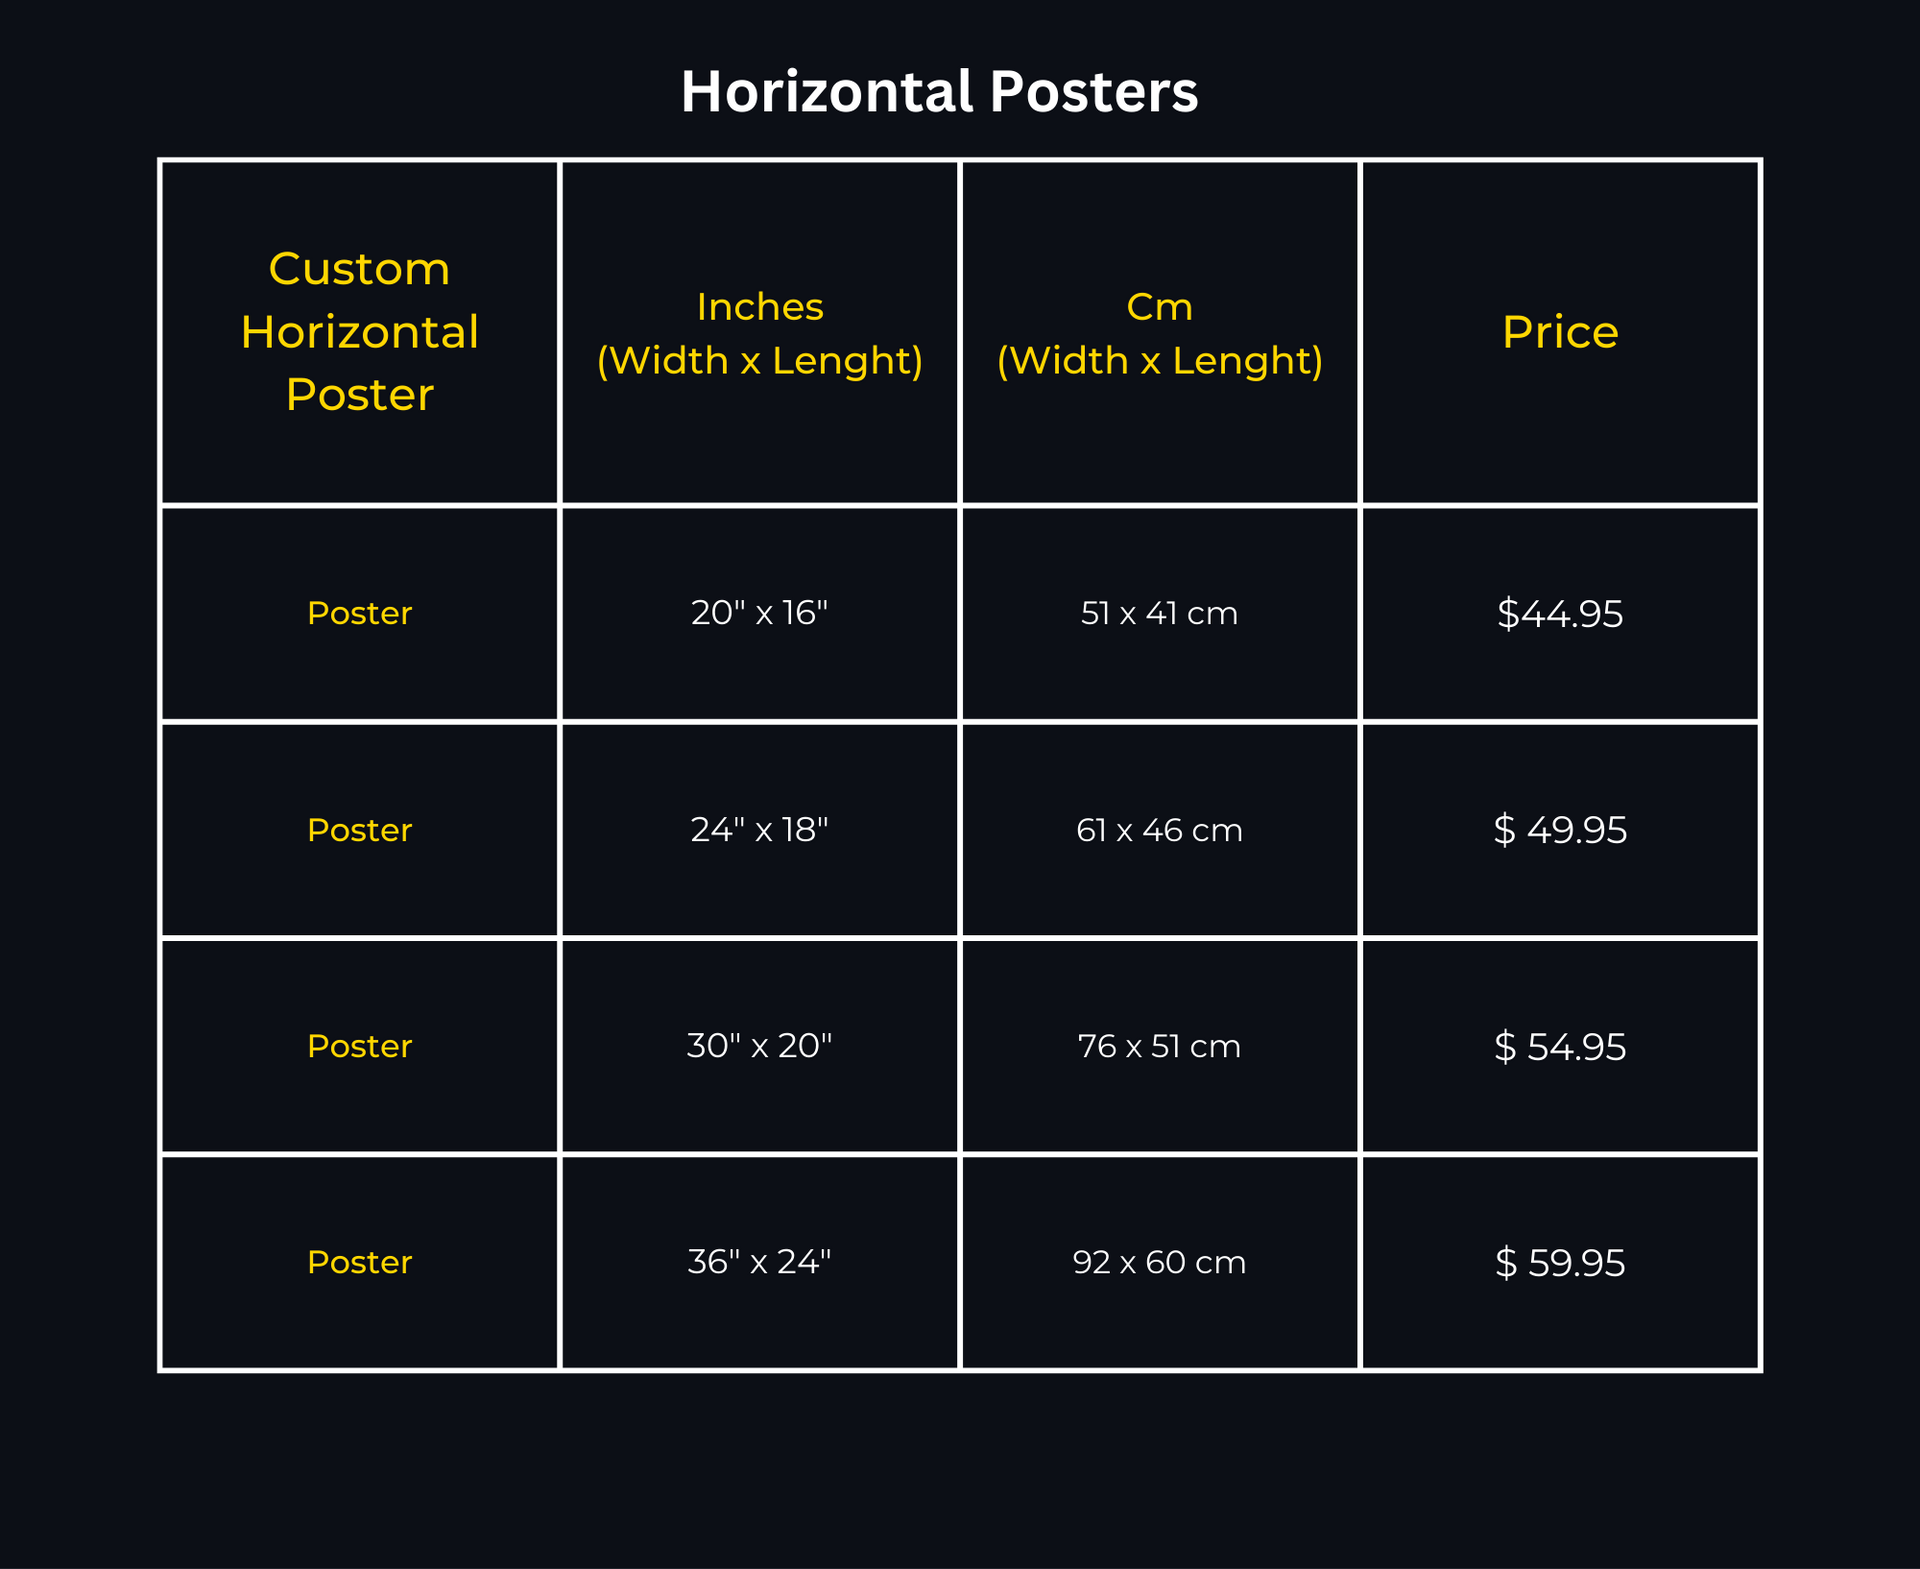 Custom Horizontal Posters with Sizes and Prices